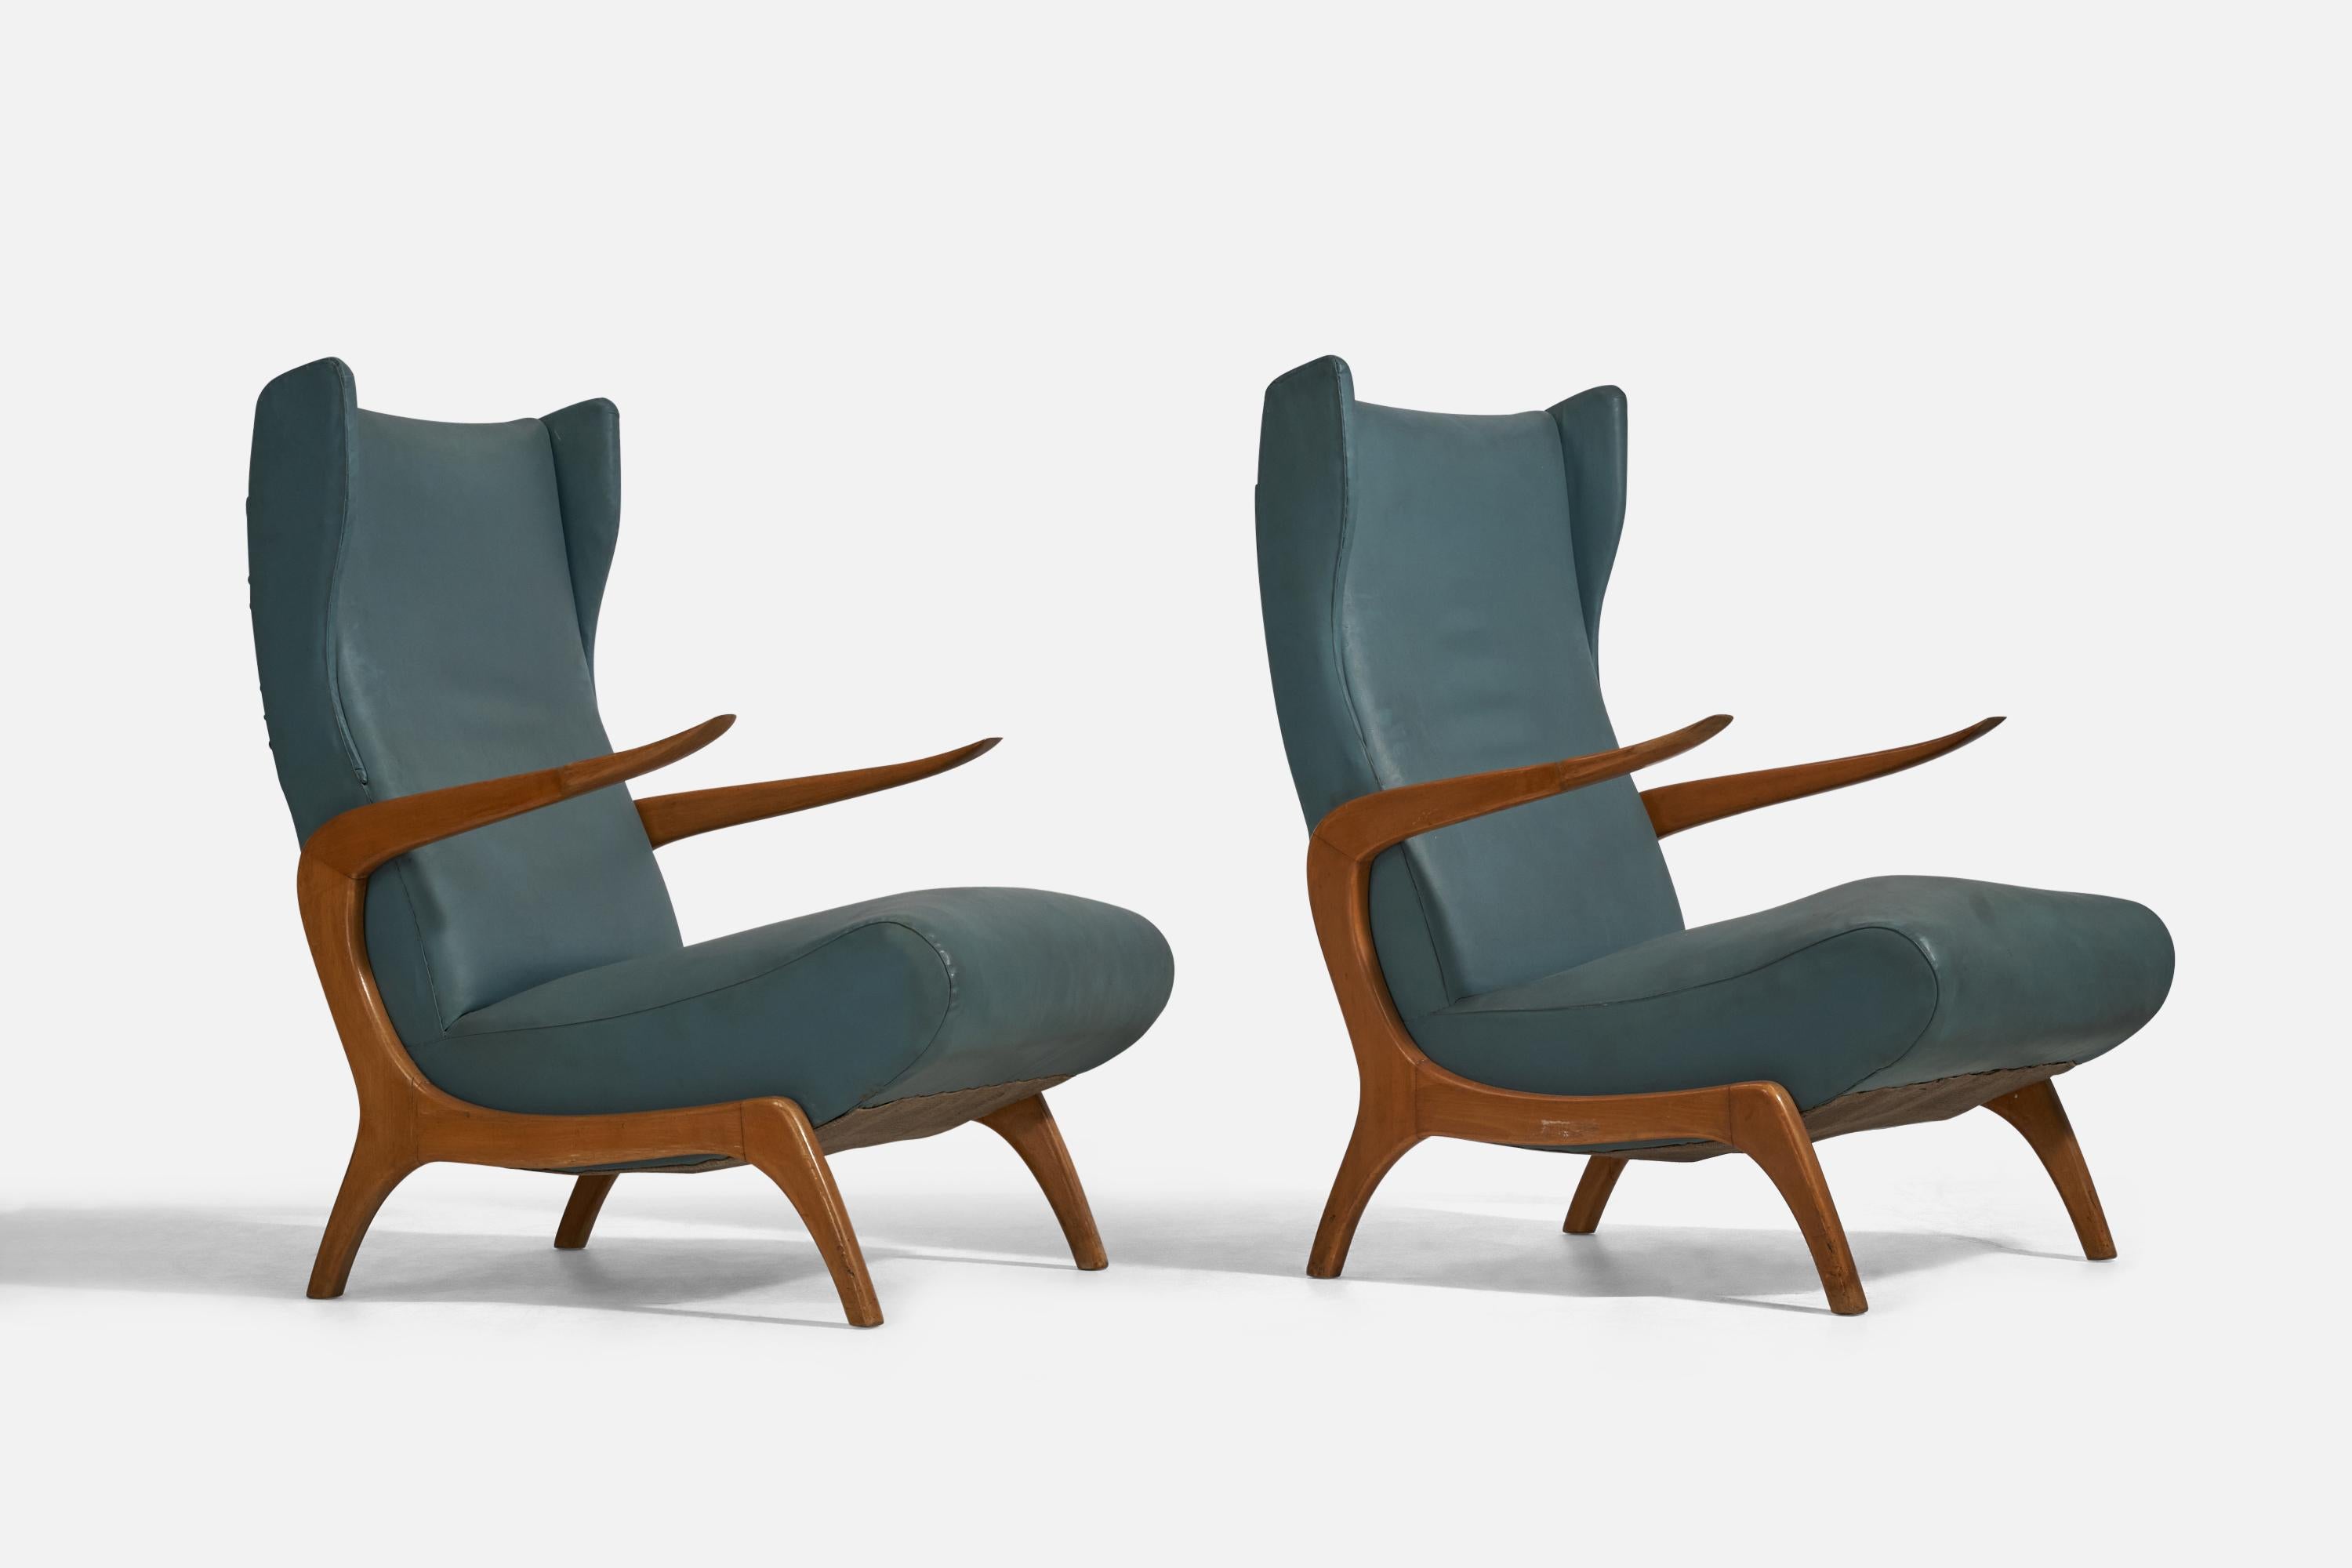 A pair of blue vinyl and wood lounge chairs designed and produced in Italy, 1950s.